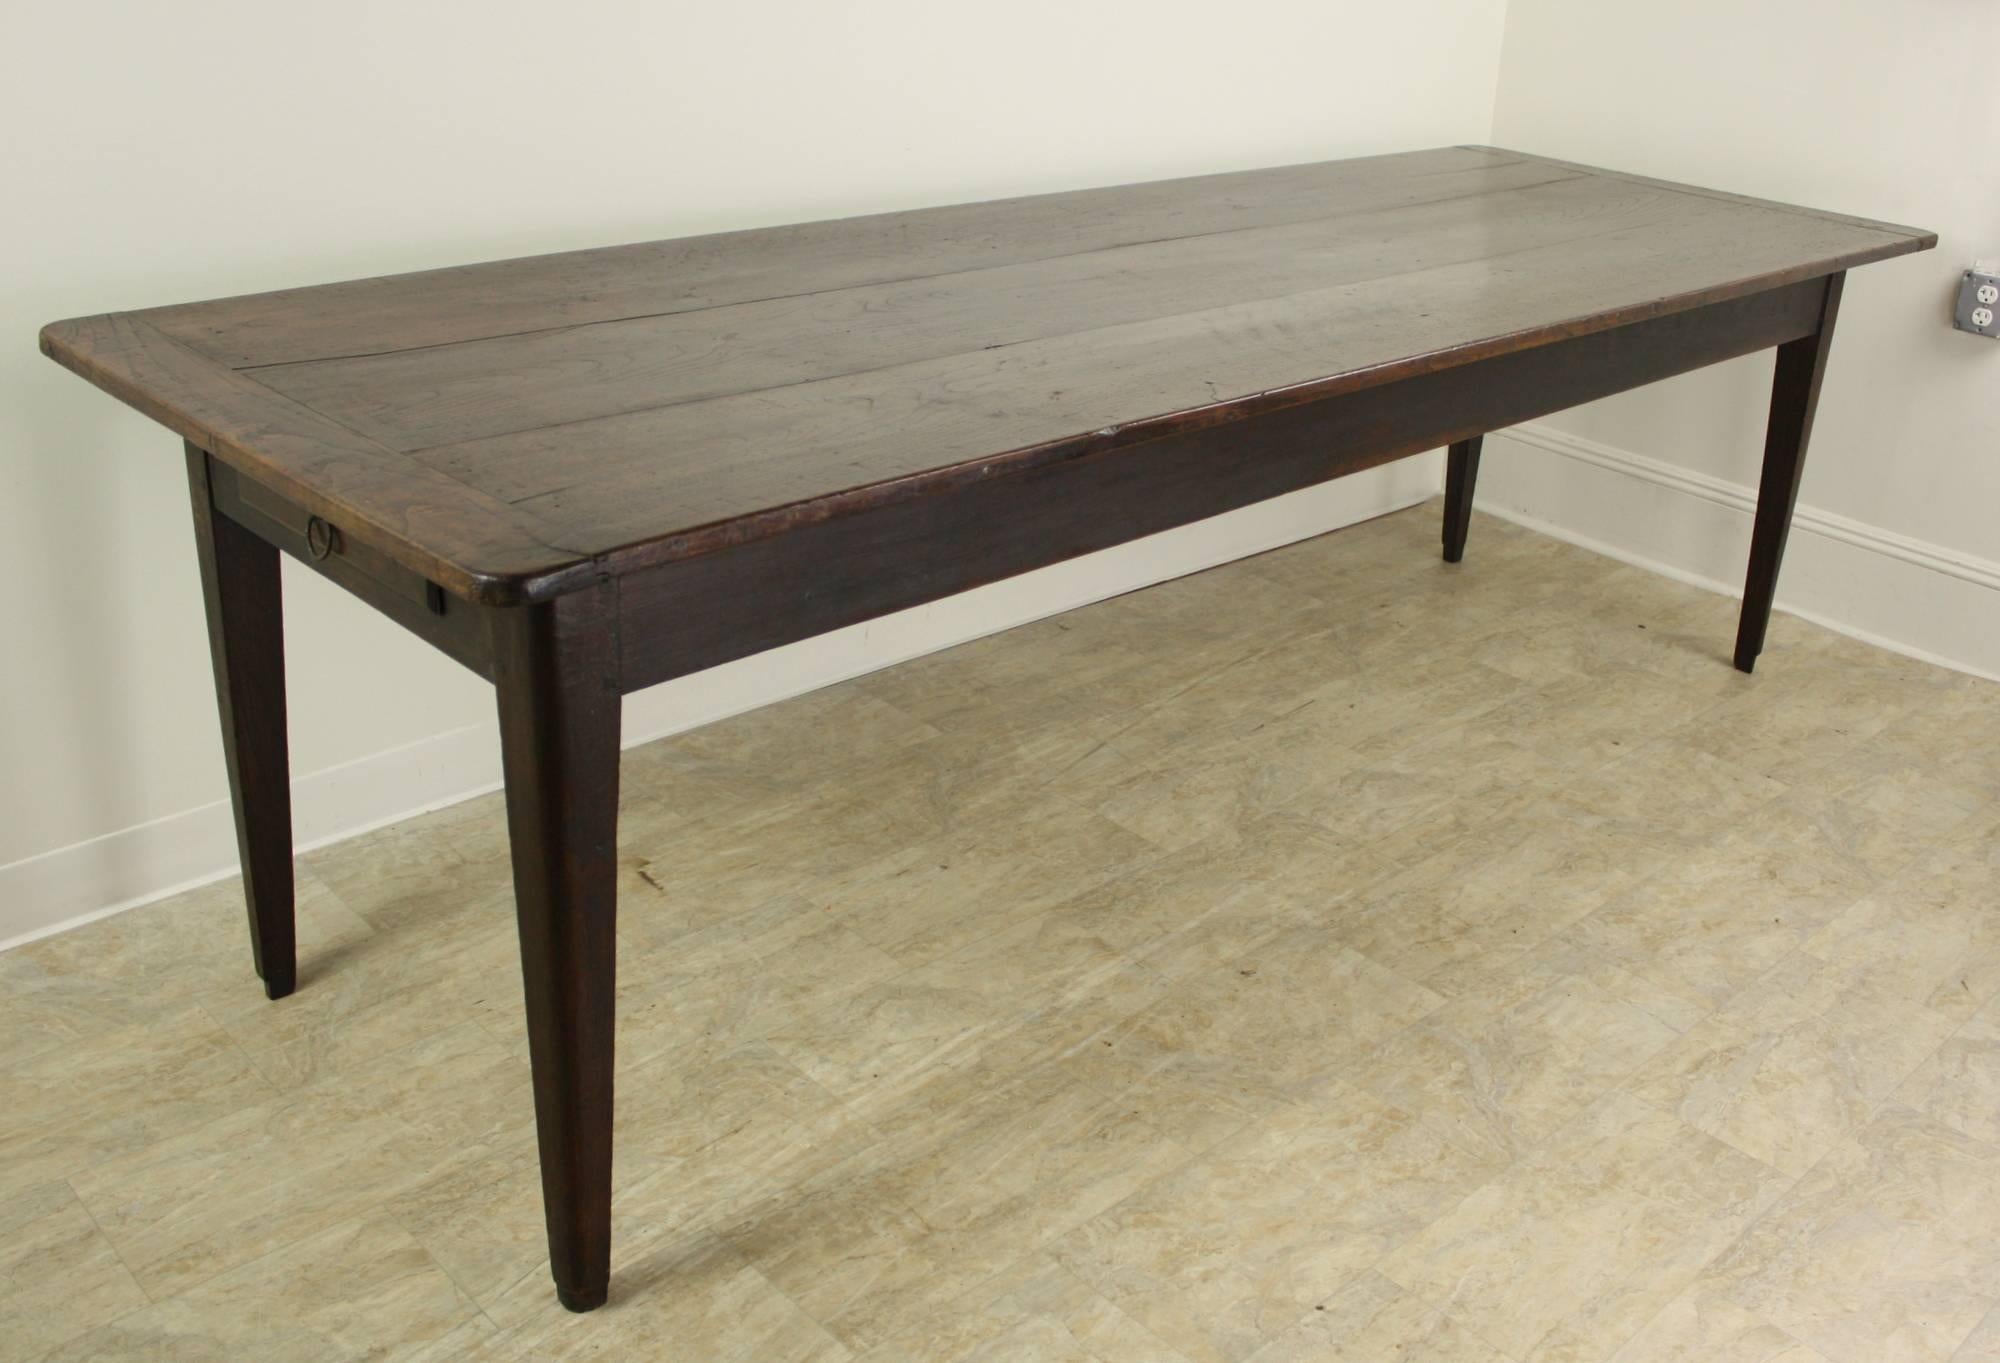 This long table is also wide, providing excellent space for dining. It is very good looking, and provides lovely attributes. There are bread board ends, with slightly rounded ends on the top. Strong tapered legs, a rich color and patina and a drawer